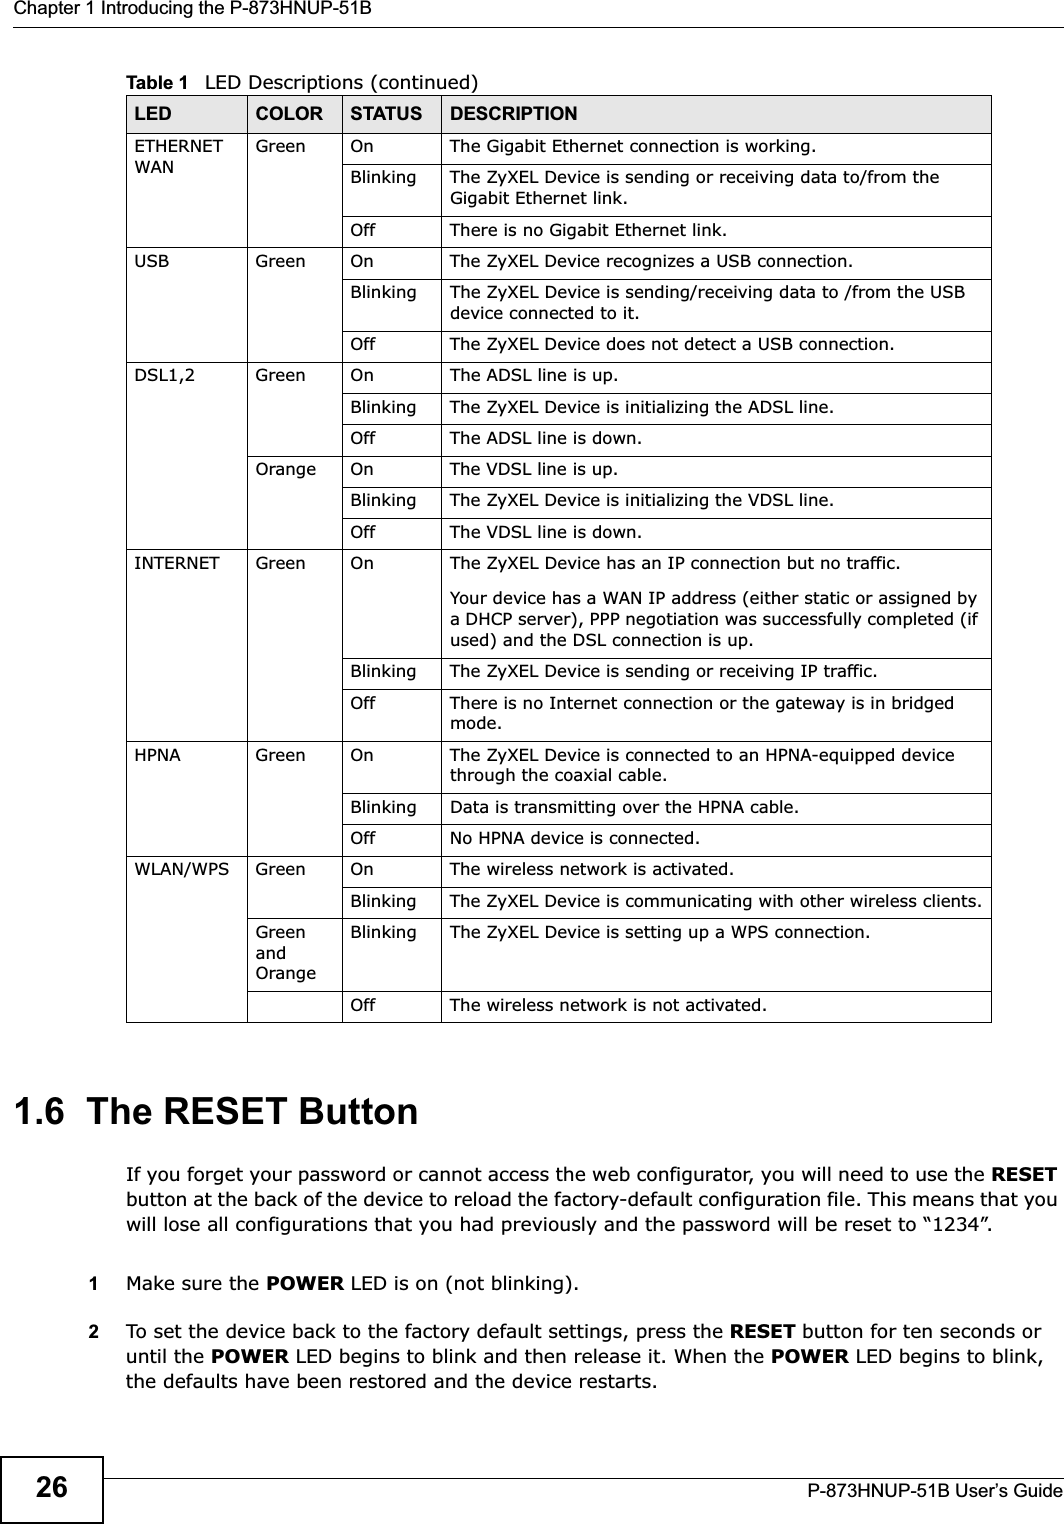 Chapter 1 Introducing the P-873HNUP-51BP-873HNUP-51B User’s Guide261.6  The RESET ButtonIf you forget your password or cannot access the web configurator, you will need to use the RESET button at the back of the device to reload the factory-default configuration file. This means that you will lose all configurations that you had previously and the password will be reset to “1234”. 1Make sure the POWER LED is on (not blinking).2To set the device back to the factory default settings, press the RESET button for ten seconds or until the POWER LED begins to blink and then release it. When the POWER LED begins to blink, the defaults have been restored and the device restarts.ETHERNET WANGreen On The Gigabit Ethernet connection is working.Blinking The ZyXEL Device is sending or receiving data to/from the Gigabit Ethernet link.Off There is no Gigabit Ethernet link.USB Green On The ZyXEL Device recognizes a USB connection.Blinking The ZyXEL Device is sending/receiving data to /from the USB device connected to it.Off The ZyXEL Device does not detect a USB connection.DSL1,2 Green On The ADSL line is up.Blinking The ZyXEL Device is initializing the ADSL line.Off The ADSL line is down.Orange On The VDSL line is up.Blinking The ZyXEL Device is initializing the VDSL line.Off The VDSL line is down.INTERNET Green On The ZyXEL Device has an IP connection but no traffic.Your device has a WAN IP address (either static or assigned by a DHCP server), PPP negotiation was successfully completed (if used) and the DSL connection is up.Blinking The ZyXEL Device is sending or receiving IP traffic.Off There is no Internet connection or the gateway is in bridged mode.HPNA Green On The ZyXEL Device is connected to an HPNA-equipped device through the coaxial cable.Blinking Data is transmitting over the HPNA cable.Off No HPNA device is connected.WLAN/WPS Green On The wireless network is activated.Blinking The ZyXEL Device is communicating with other wireless clients.Green andOrangeBlinking The ZyXEL Device is setting up a WPS connection.Off The wireless network is not activated.Table 1   LED Descriptions (continued)LED COLOR STATUS DESCRIPTION